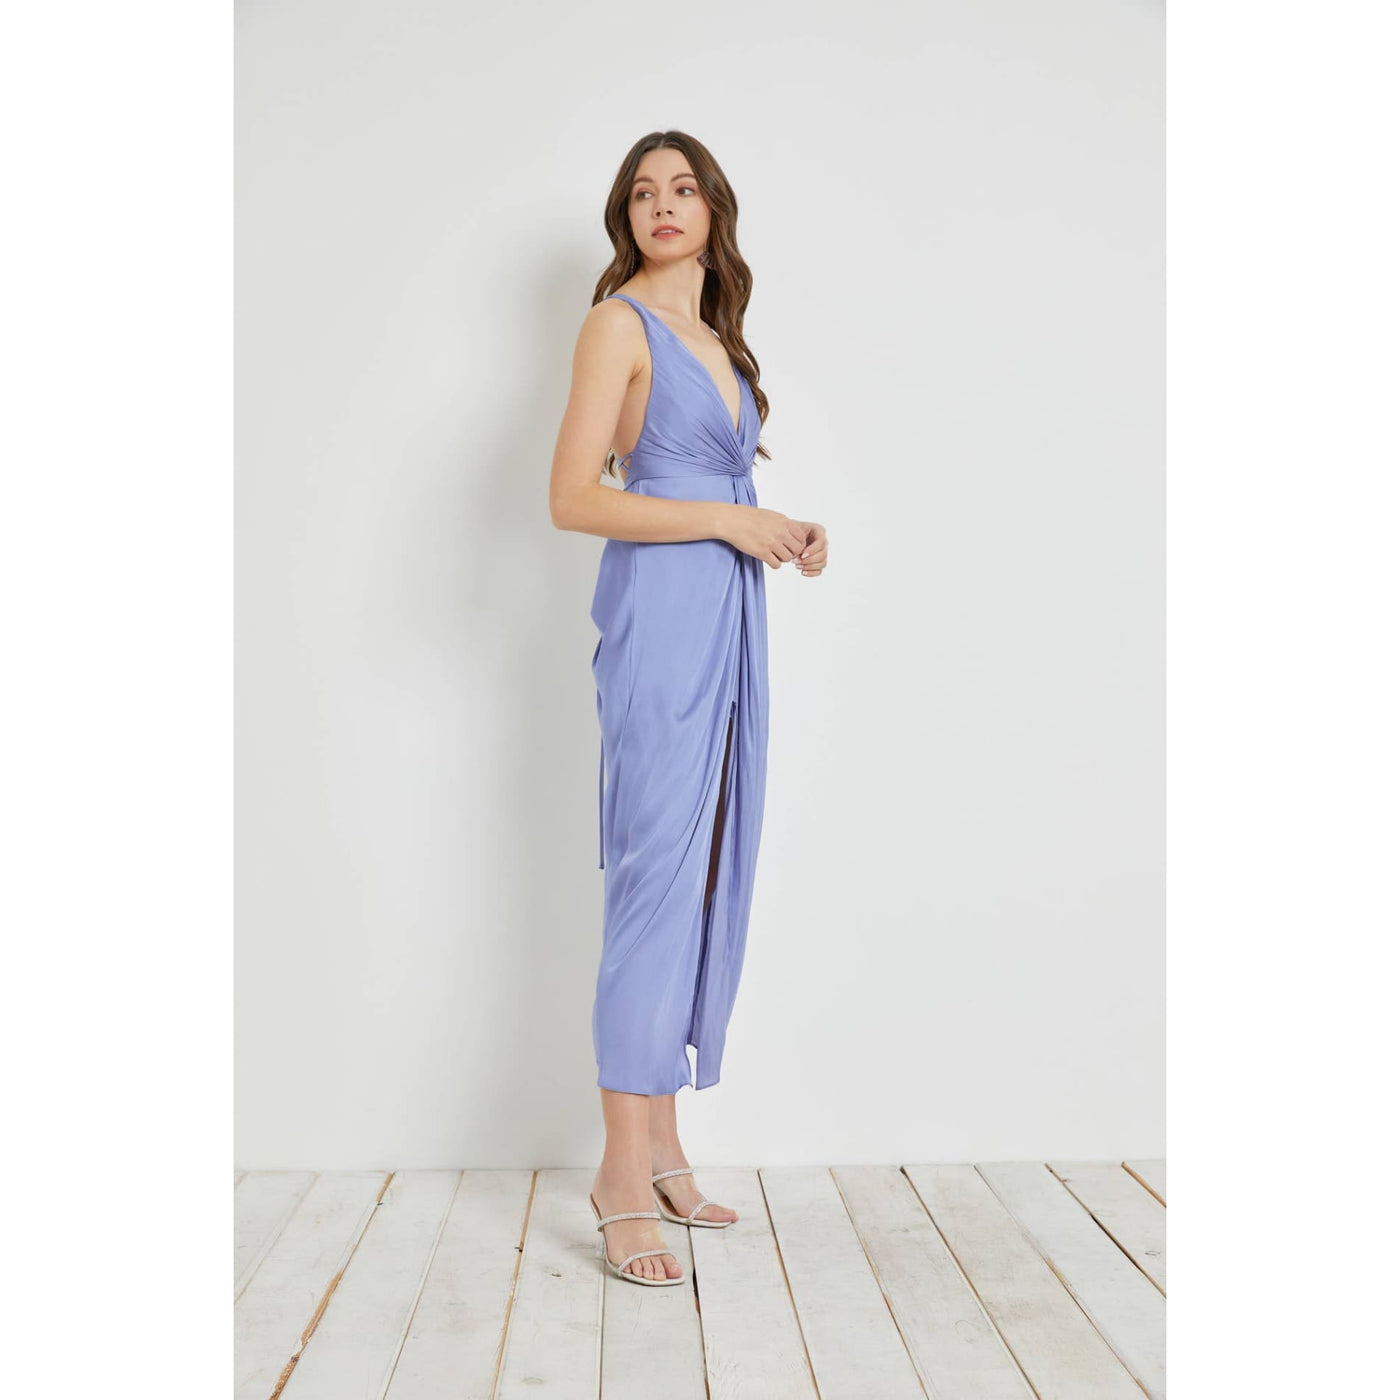 Stuck By You Midi Dress - 175 Evening Dresses/Jumpsuits/Rompers